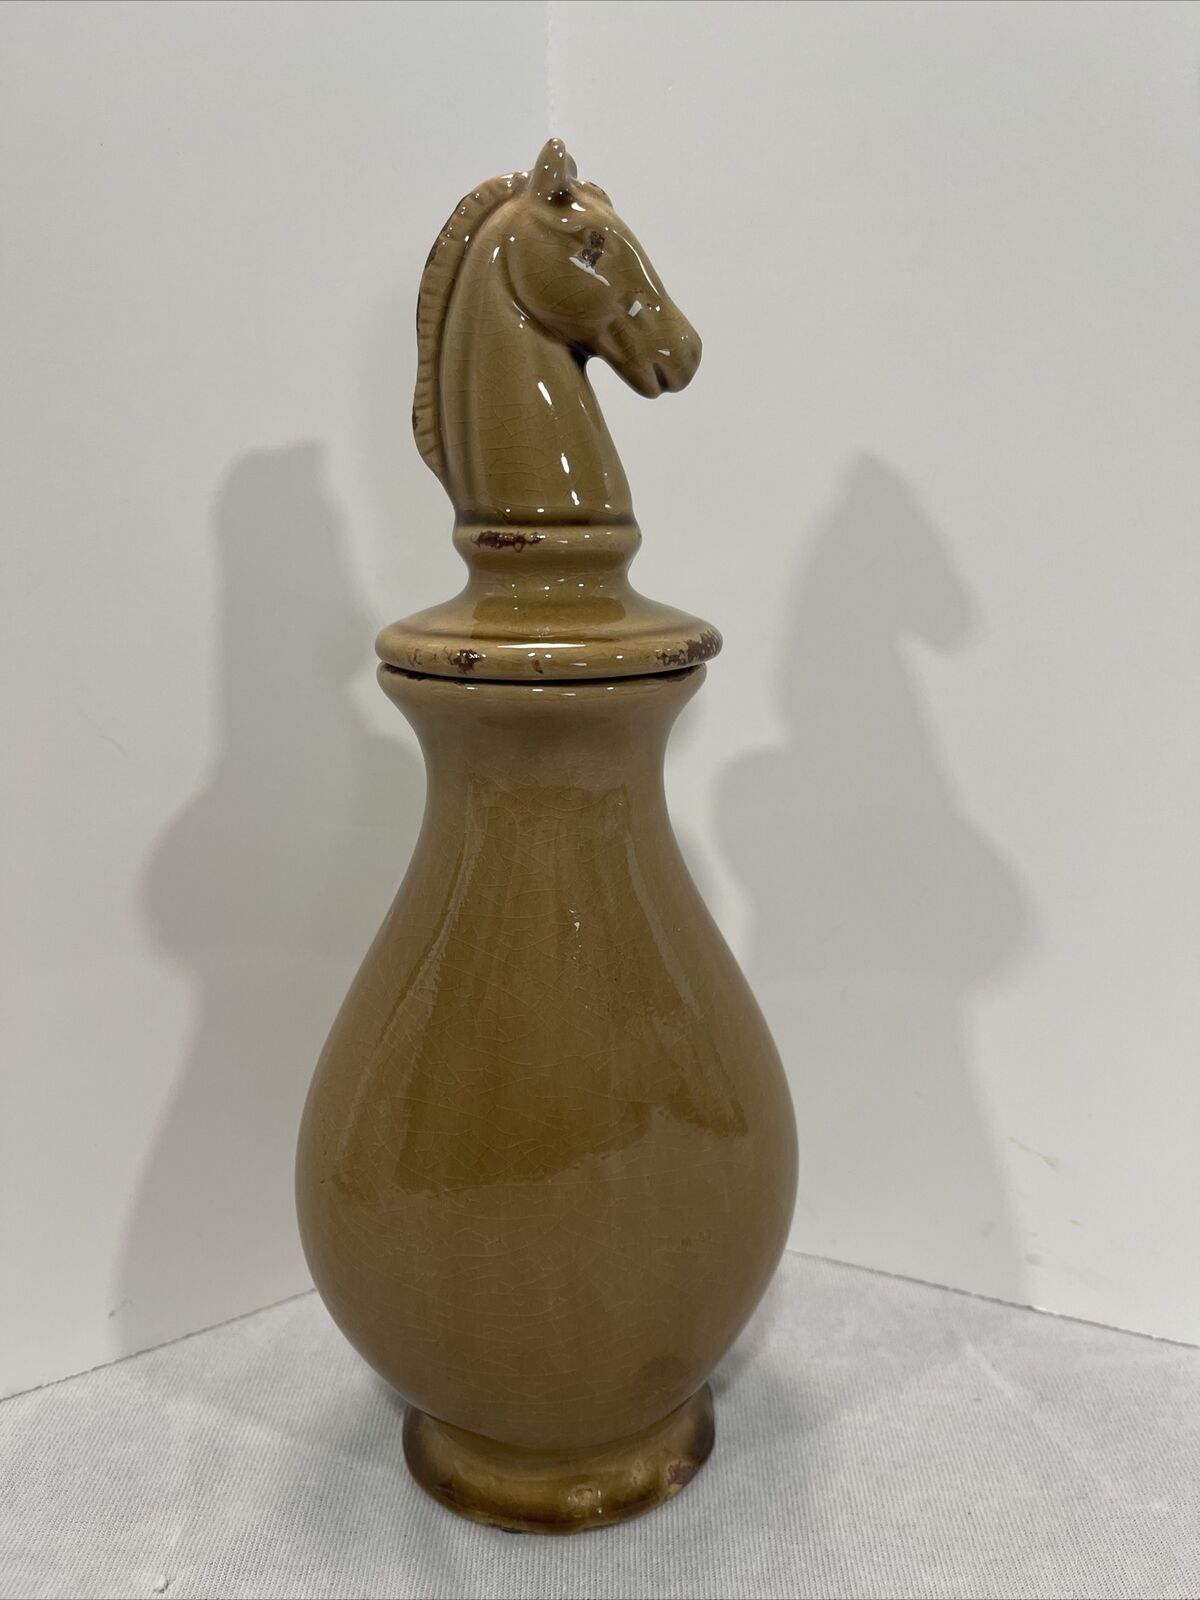 Horse Head Decanter Bottle Ceramic With Glaze And Drip Effect On Bottom 11.5”.